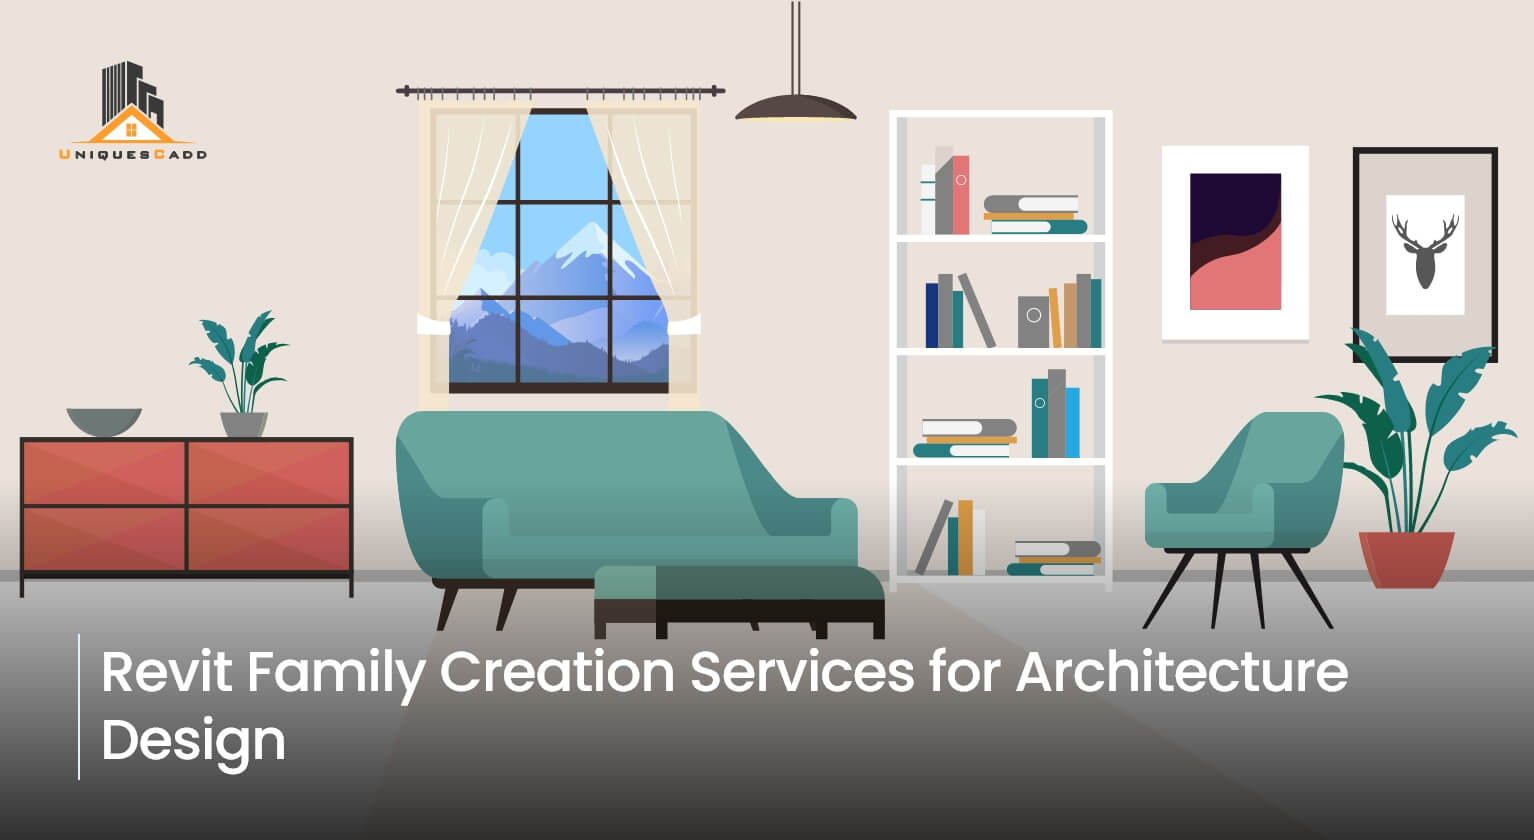 Revit Family Creation Services for Architectural Design